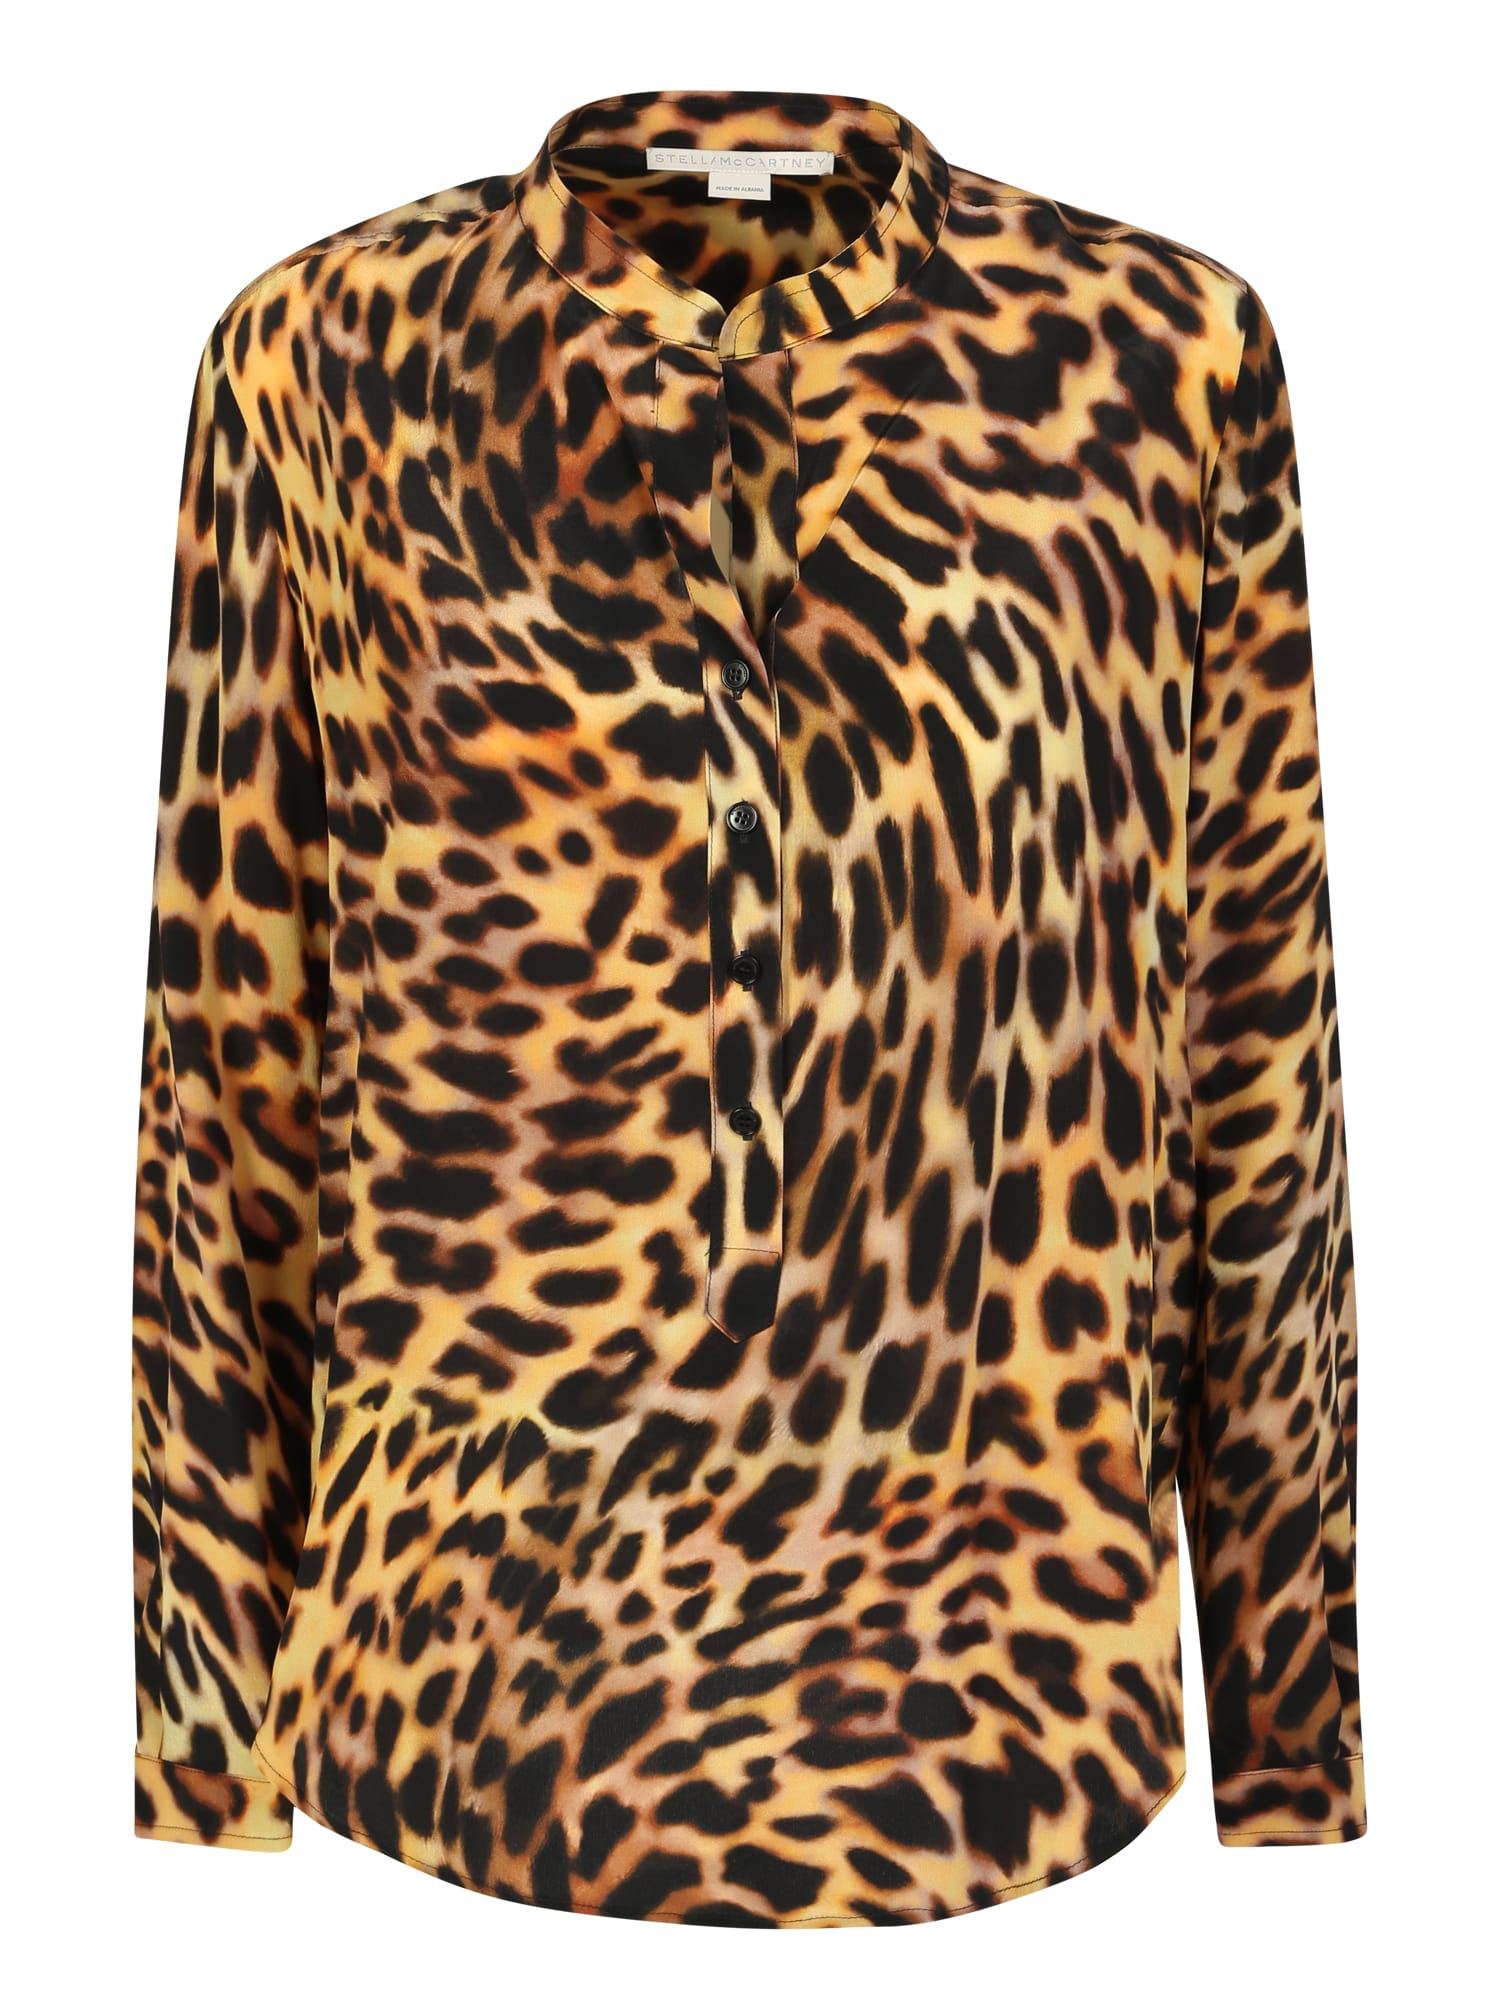 Stella Mccartney Animalier Print Shirt For A Touch Of Class With Simple Lines